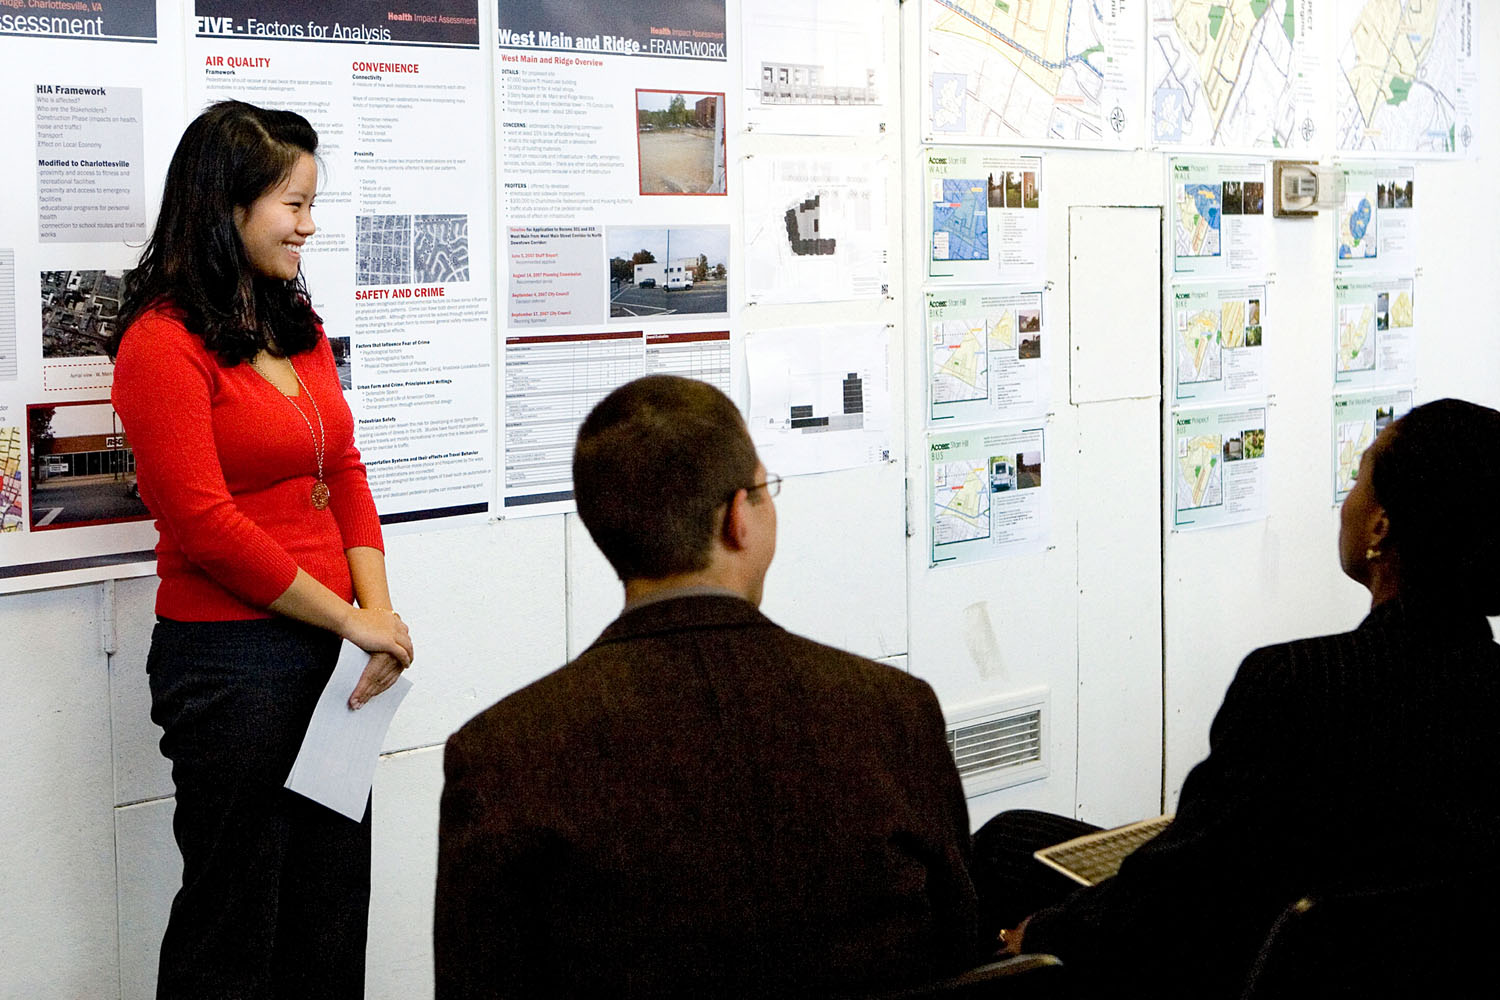 Student talks to a group of people about her poster presentation